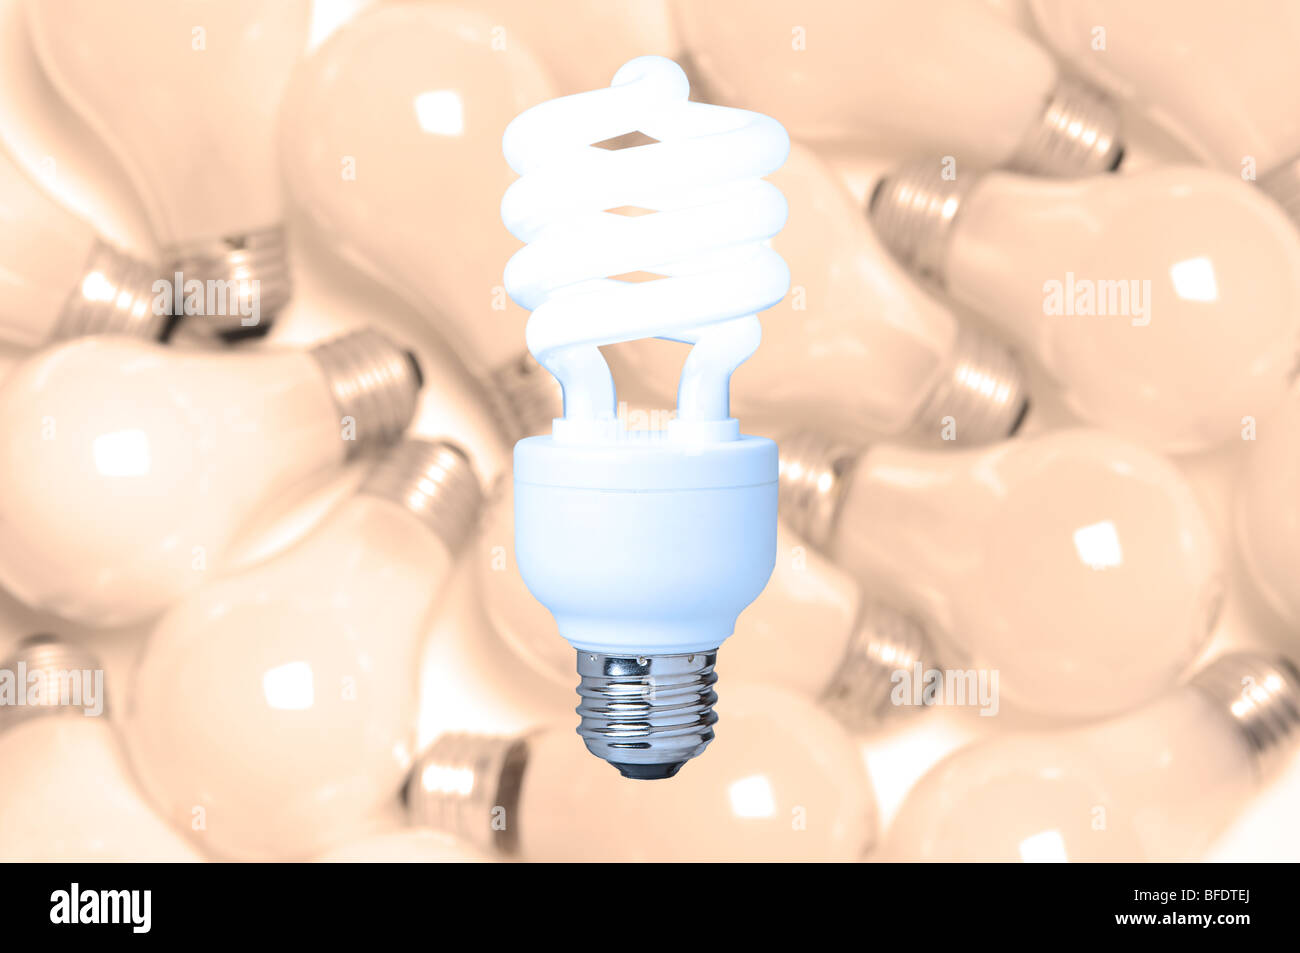 a compact fluorescent light bulb against a background of incandescent light bulbs Stock Photo